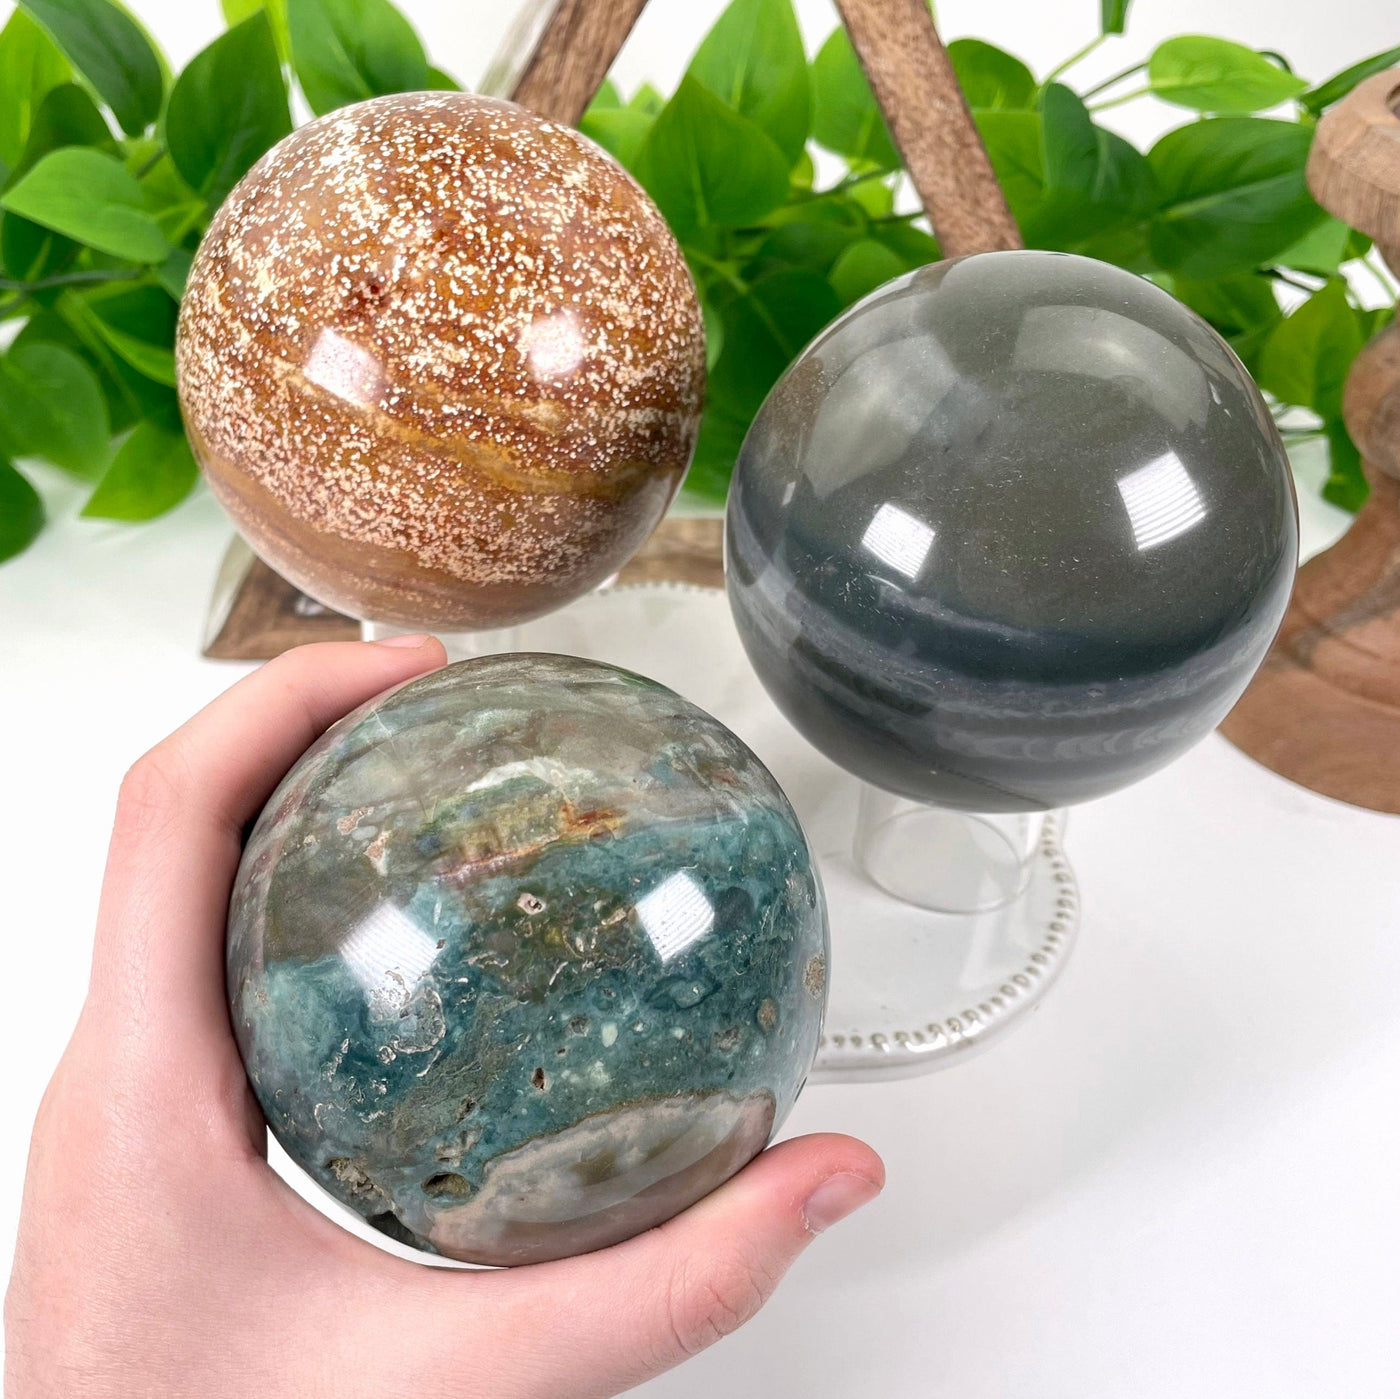 all three ocean jasper polished sphere weight options on display for size comparison with one in hand for reference